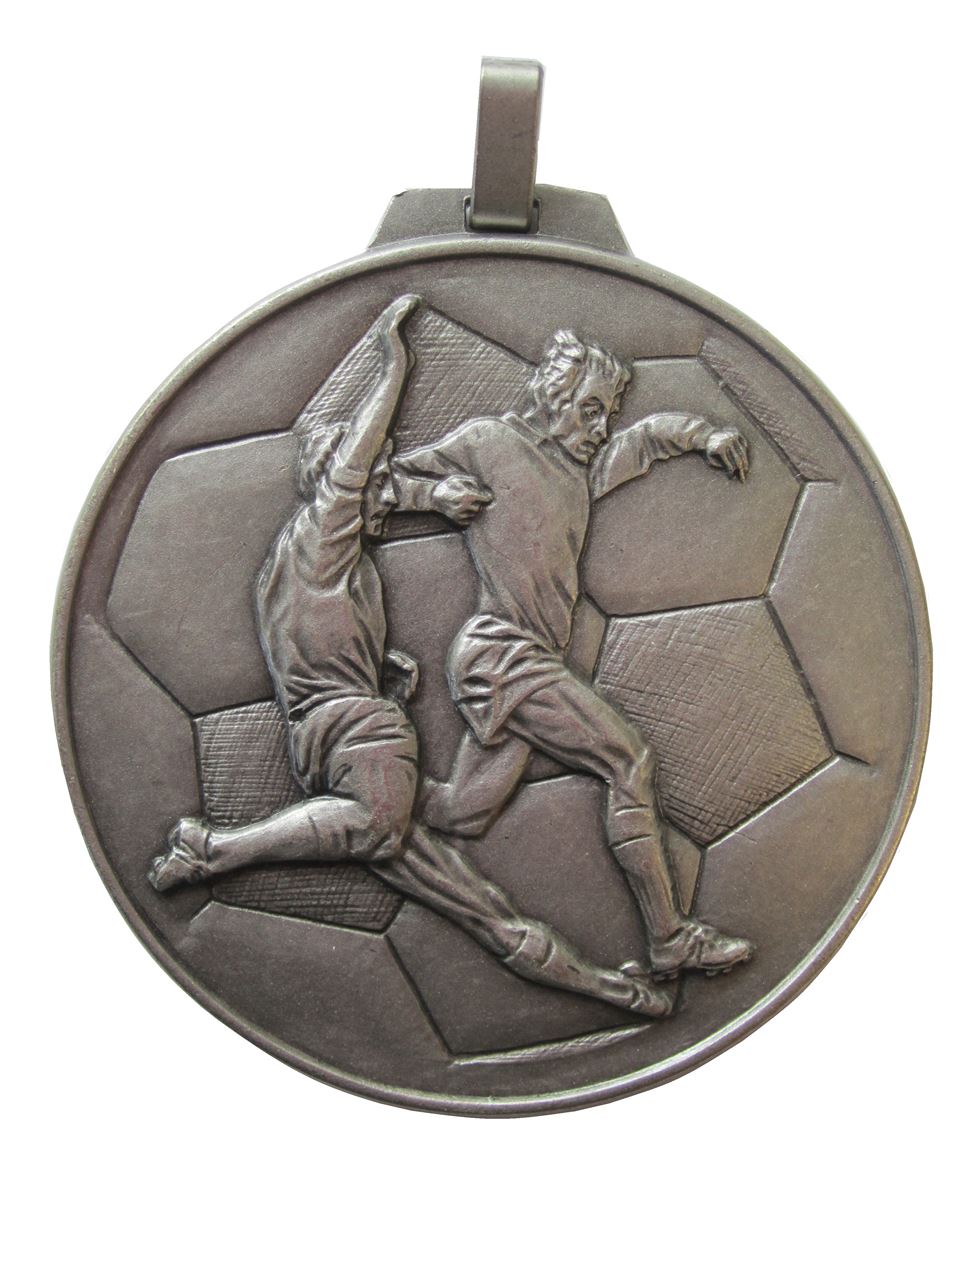 Silver Economy Football Medal (size: 70mm) - 176E